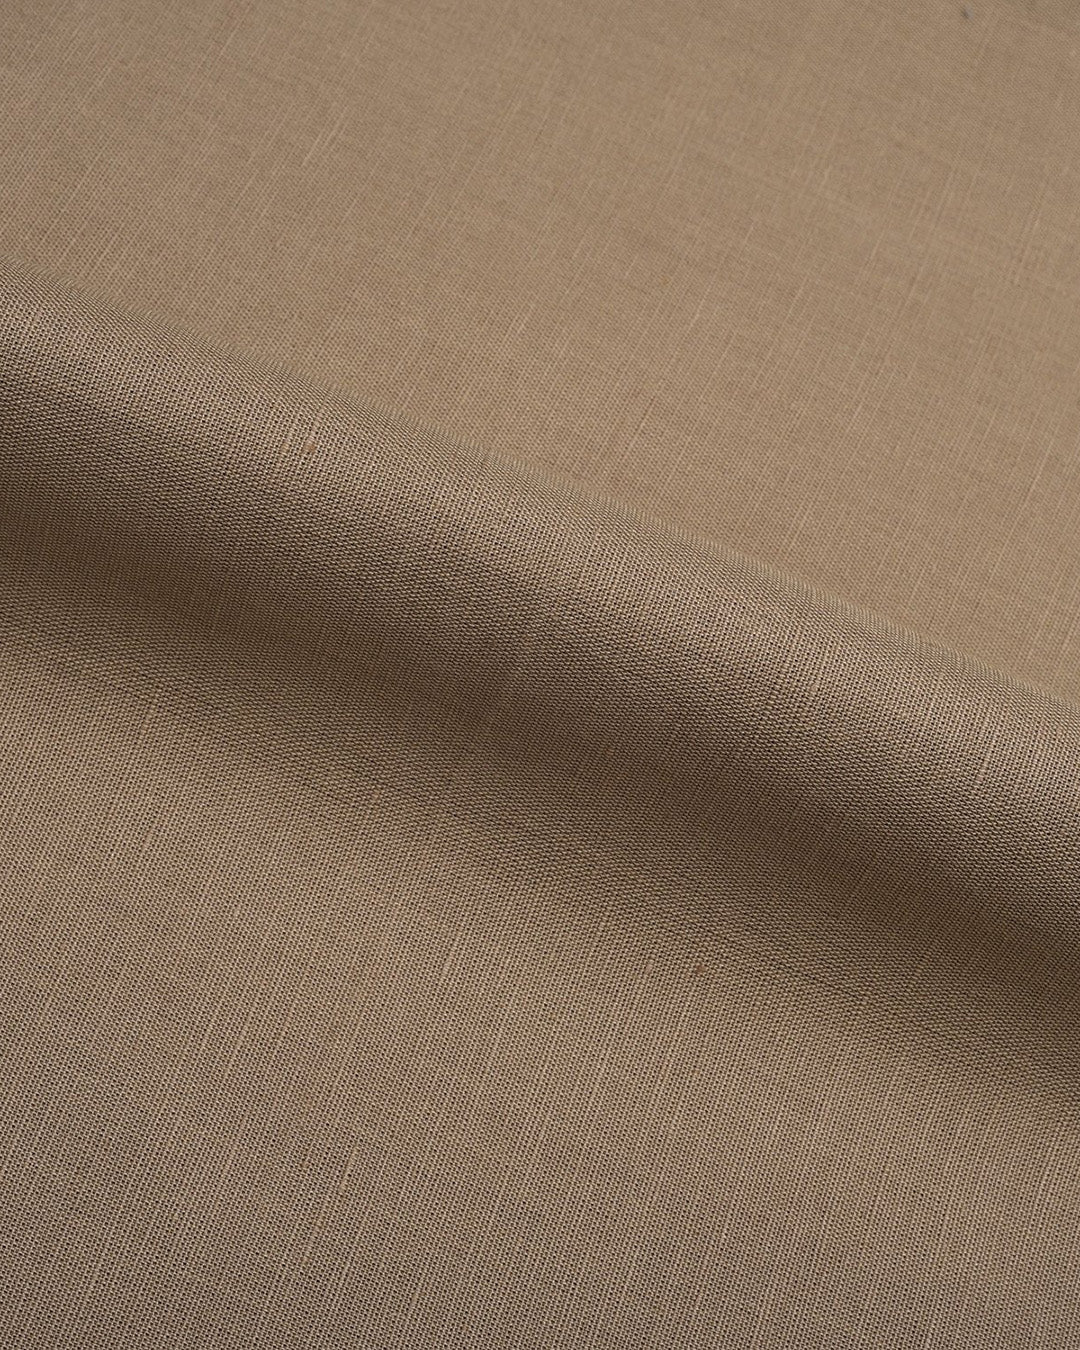 Close up of the custom linen shirt for men in light brown by Luxire Clothing